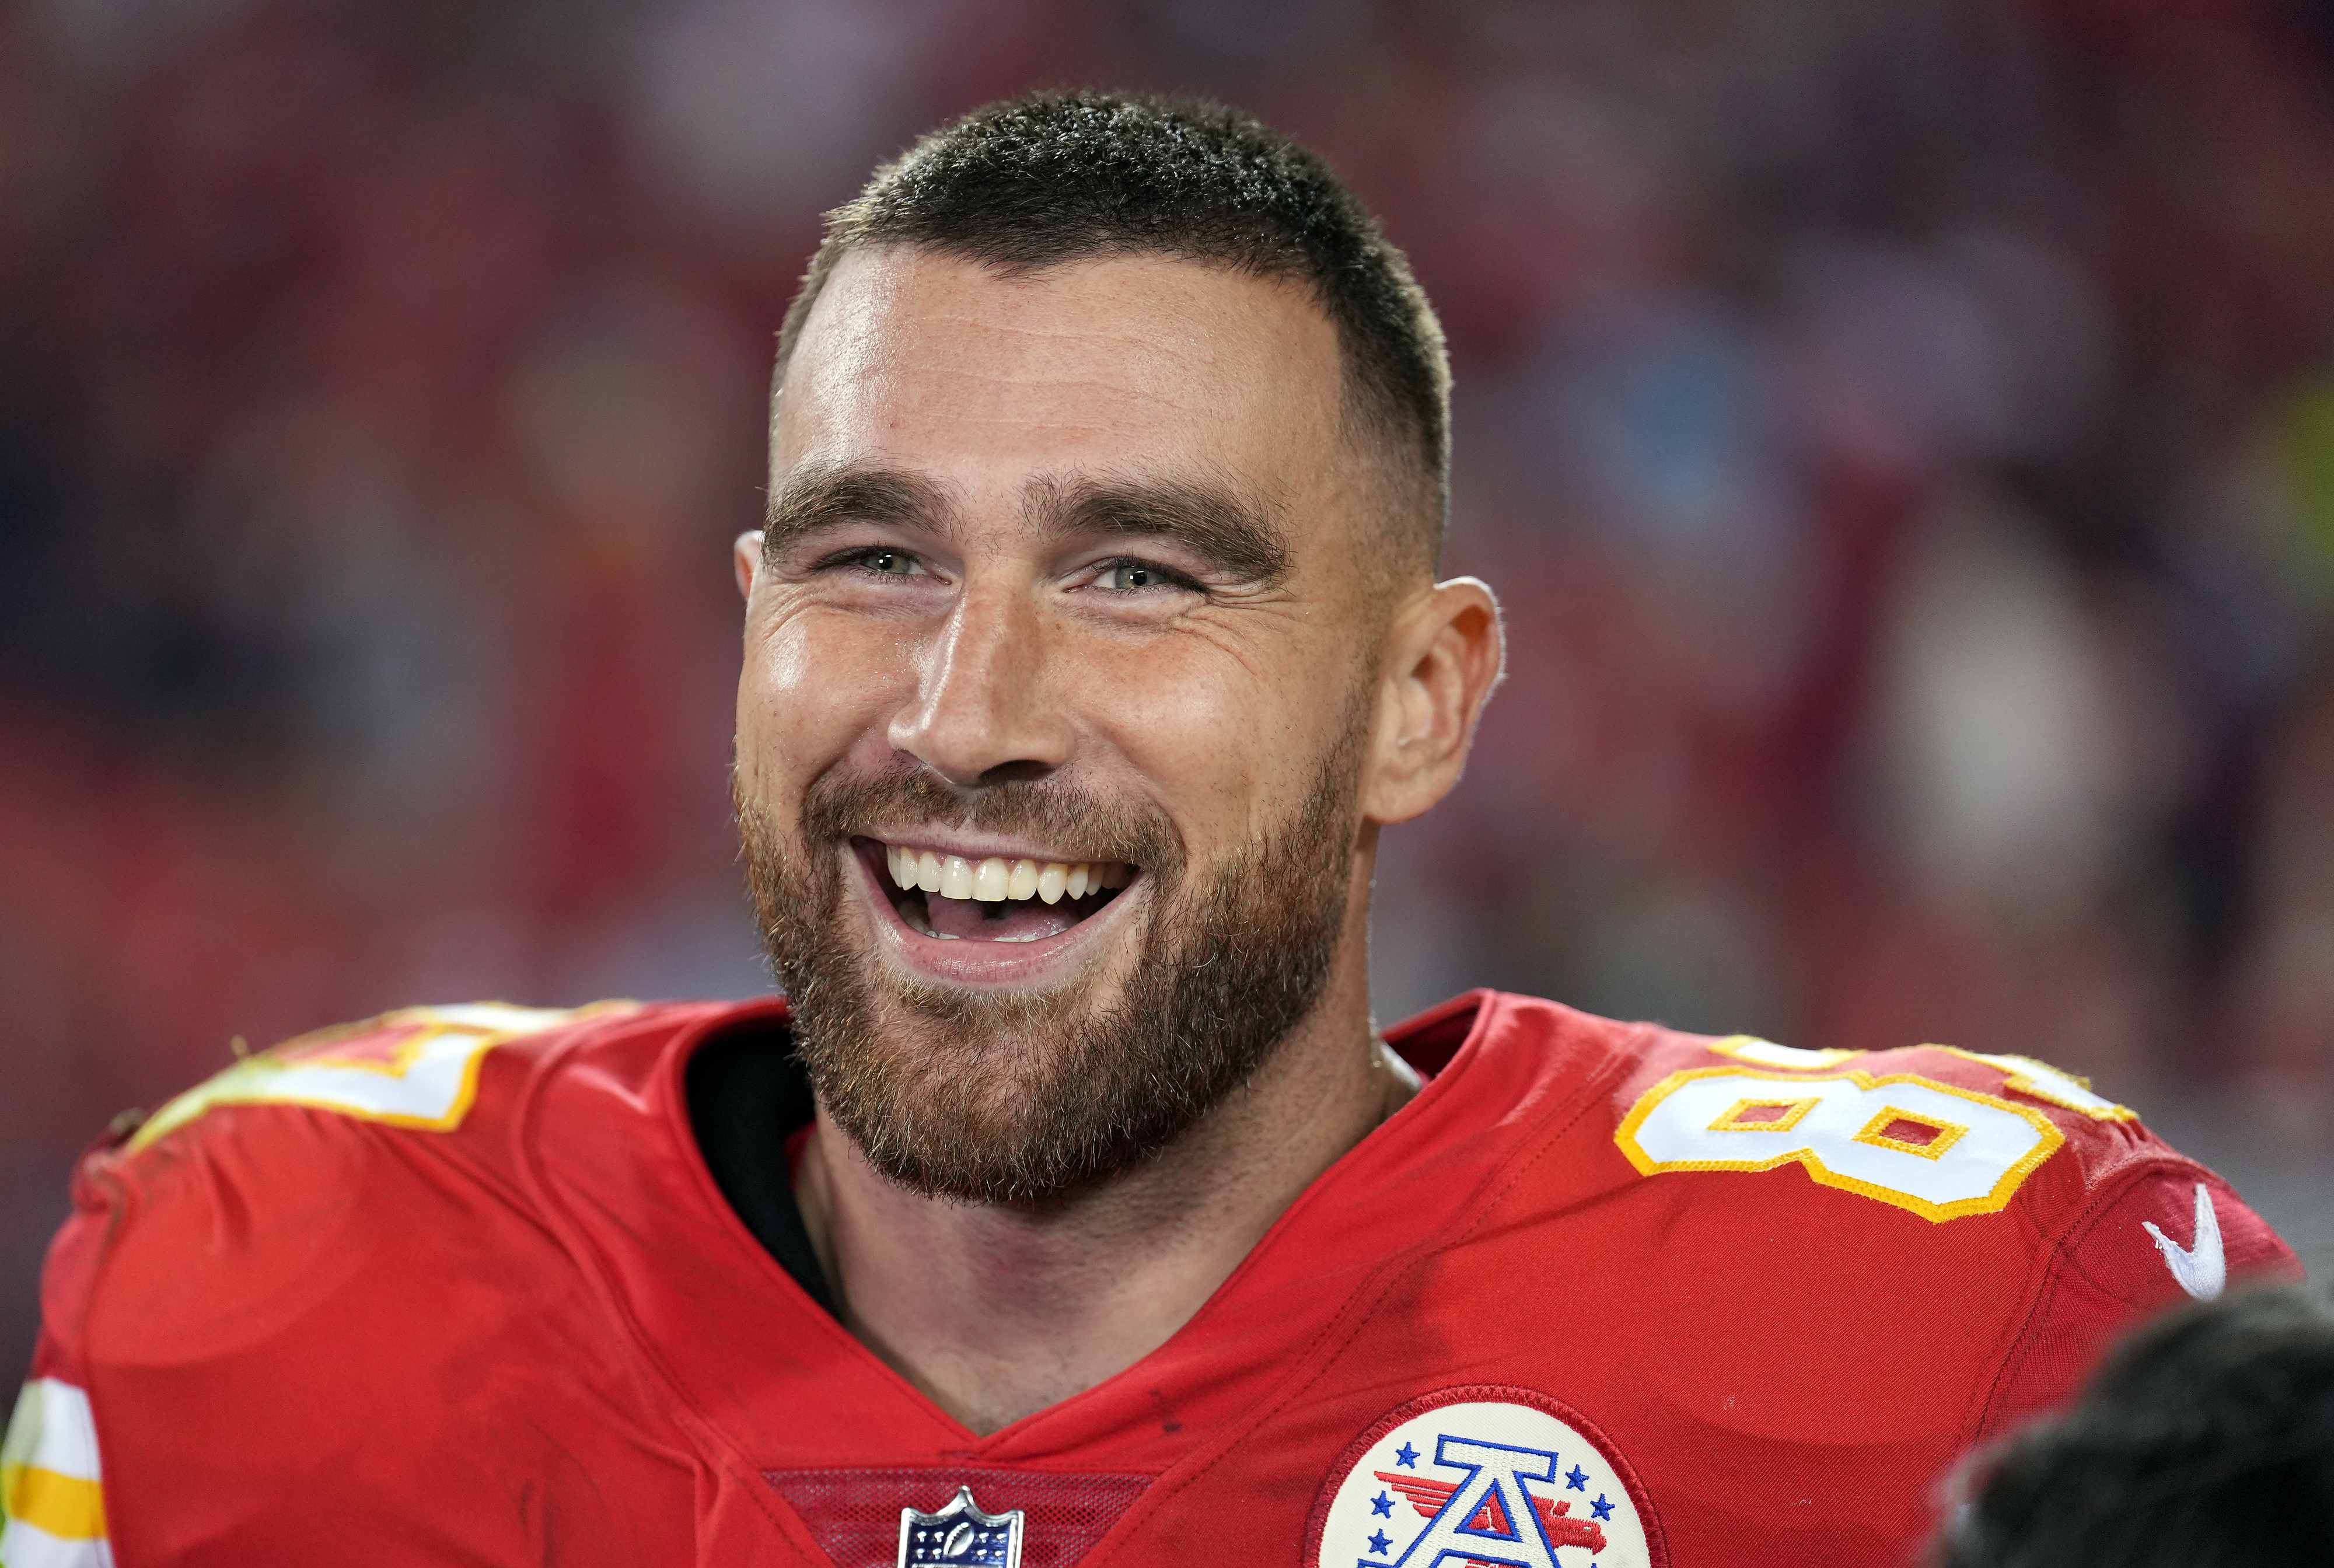 Close-up of Travis smiling and wearing his NFL uniform